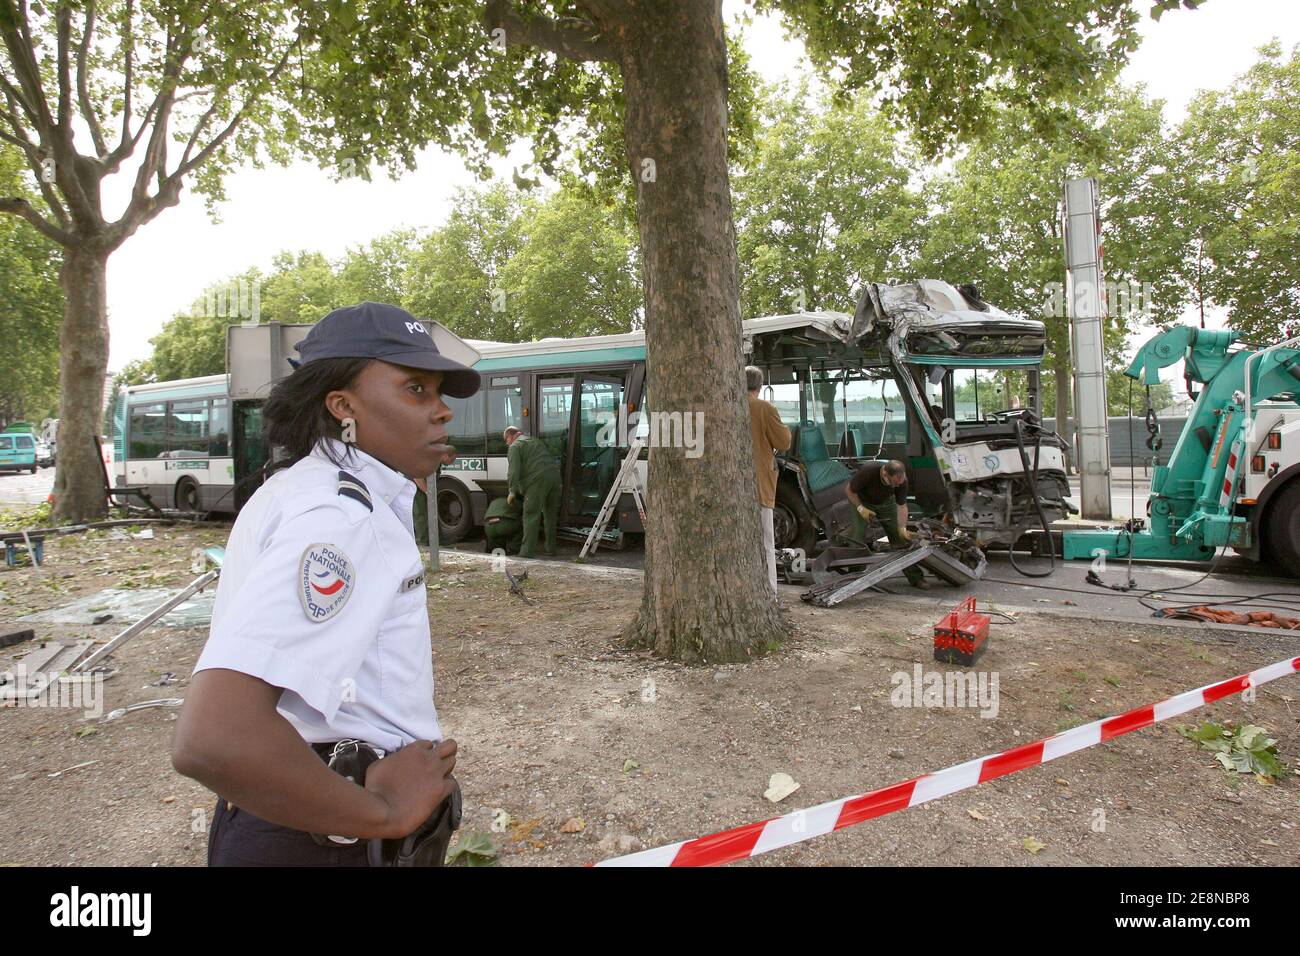 Parisian RATP bus carrying more than 19 people was involved in a crash near 'Porte de la Villette' in Paris, France on August 14, 2007. 14 are wounded and three are seriously injured. Photo by Medhi Taamallah/ABACAPRESS.COM Stock Photo